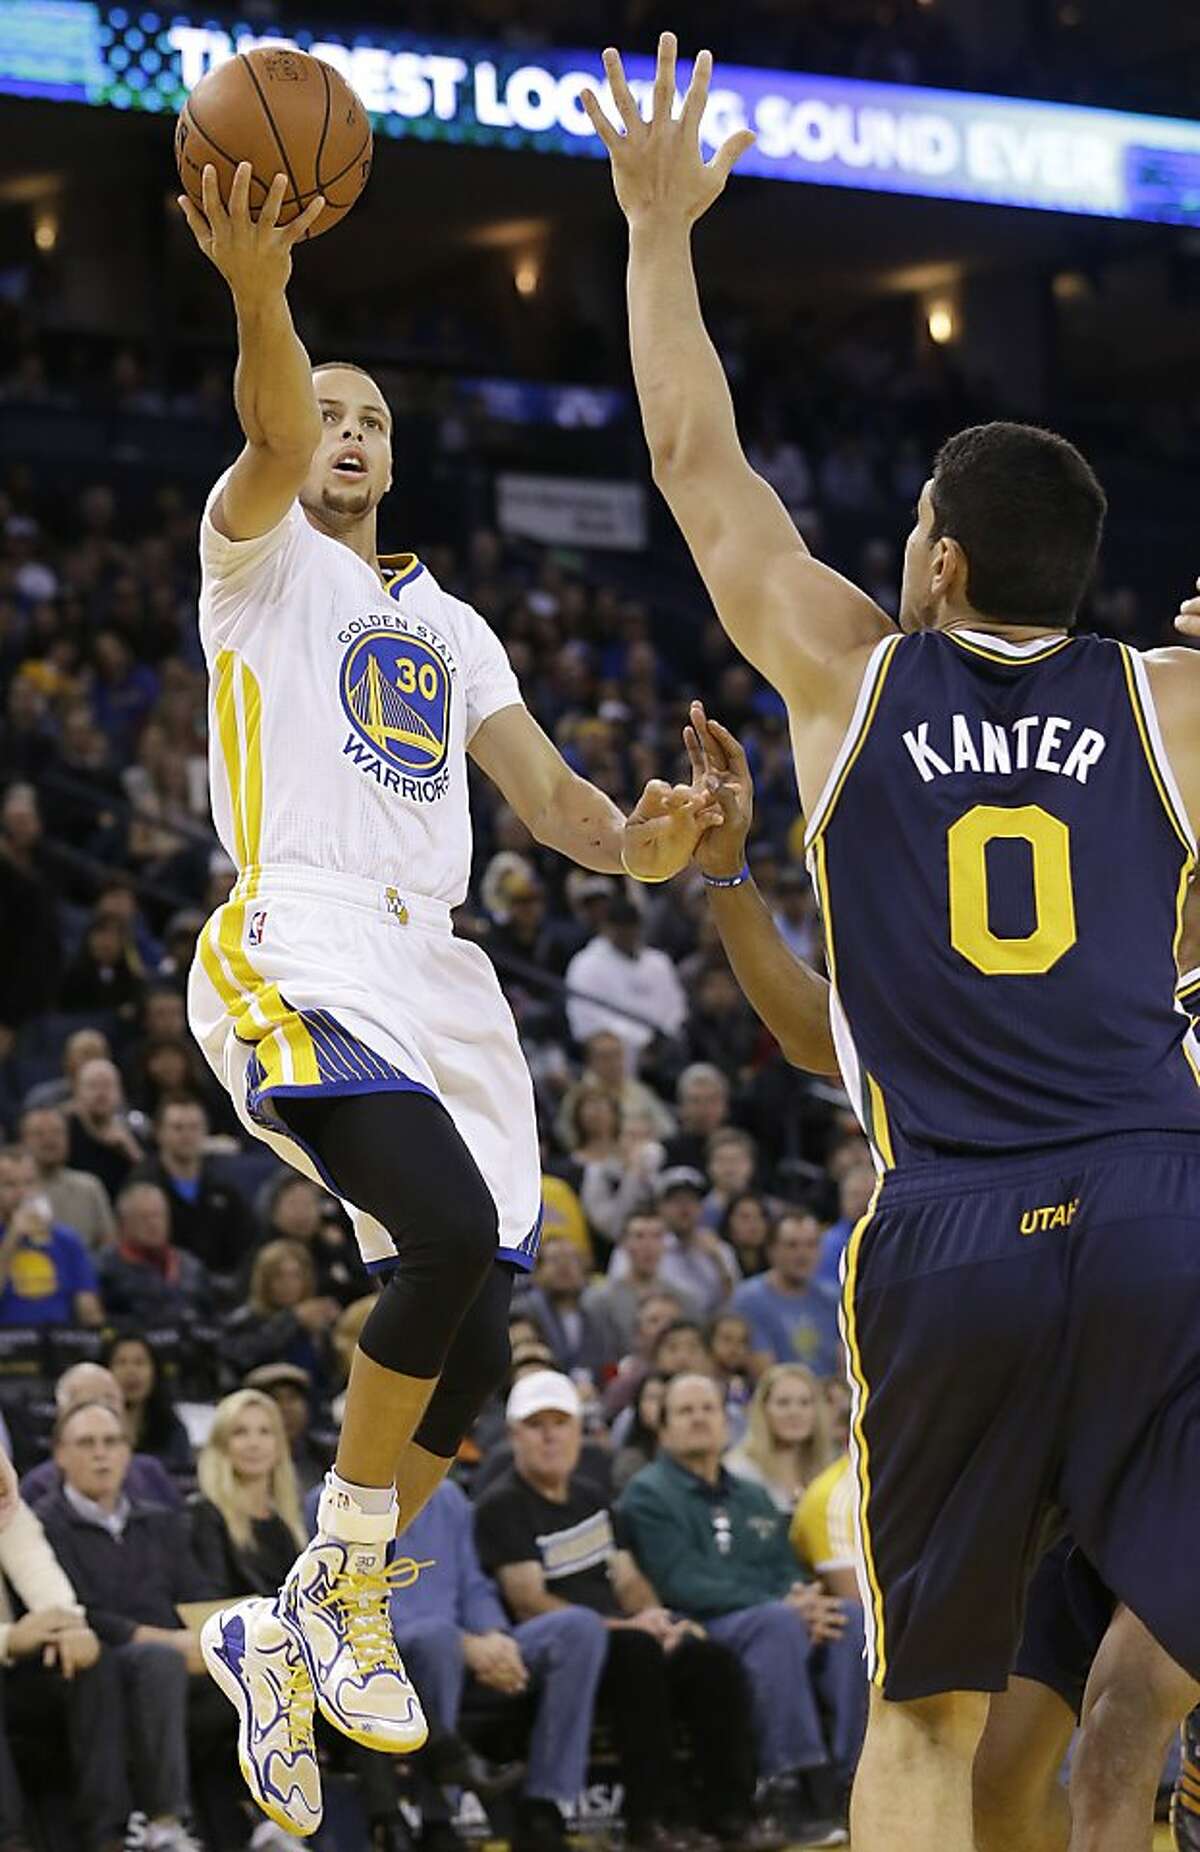 Golden State Warriors shooting guard Stephen Curry (30) shoots against Utah Jazz center Enes Kanter (0) during the first quarter of an NBA basketball game in Oakland, Calif., Saturday, Nov. 16, 2013. (AP Photo/Jeff Chiu)